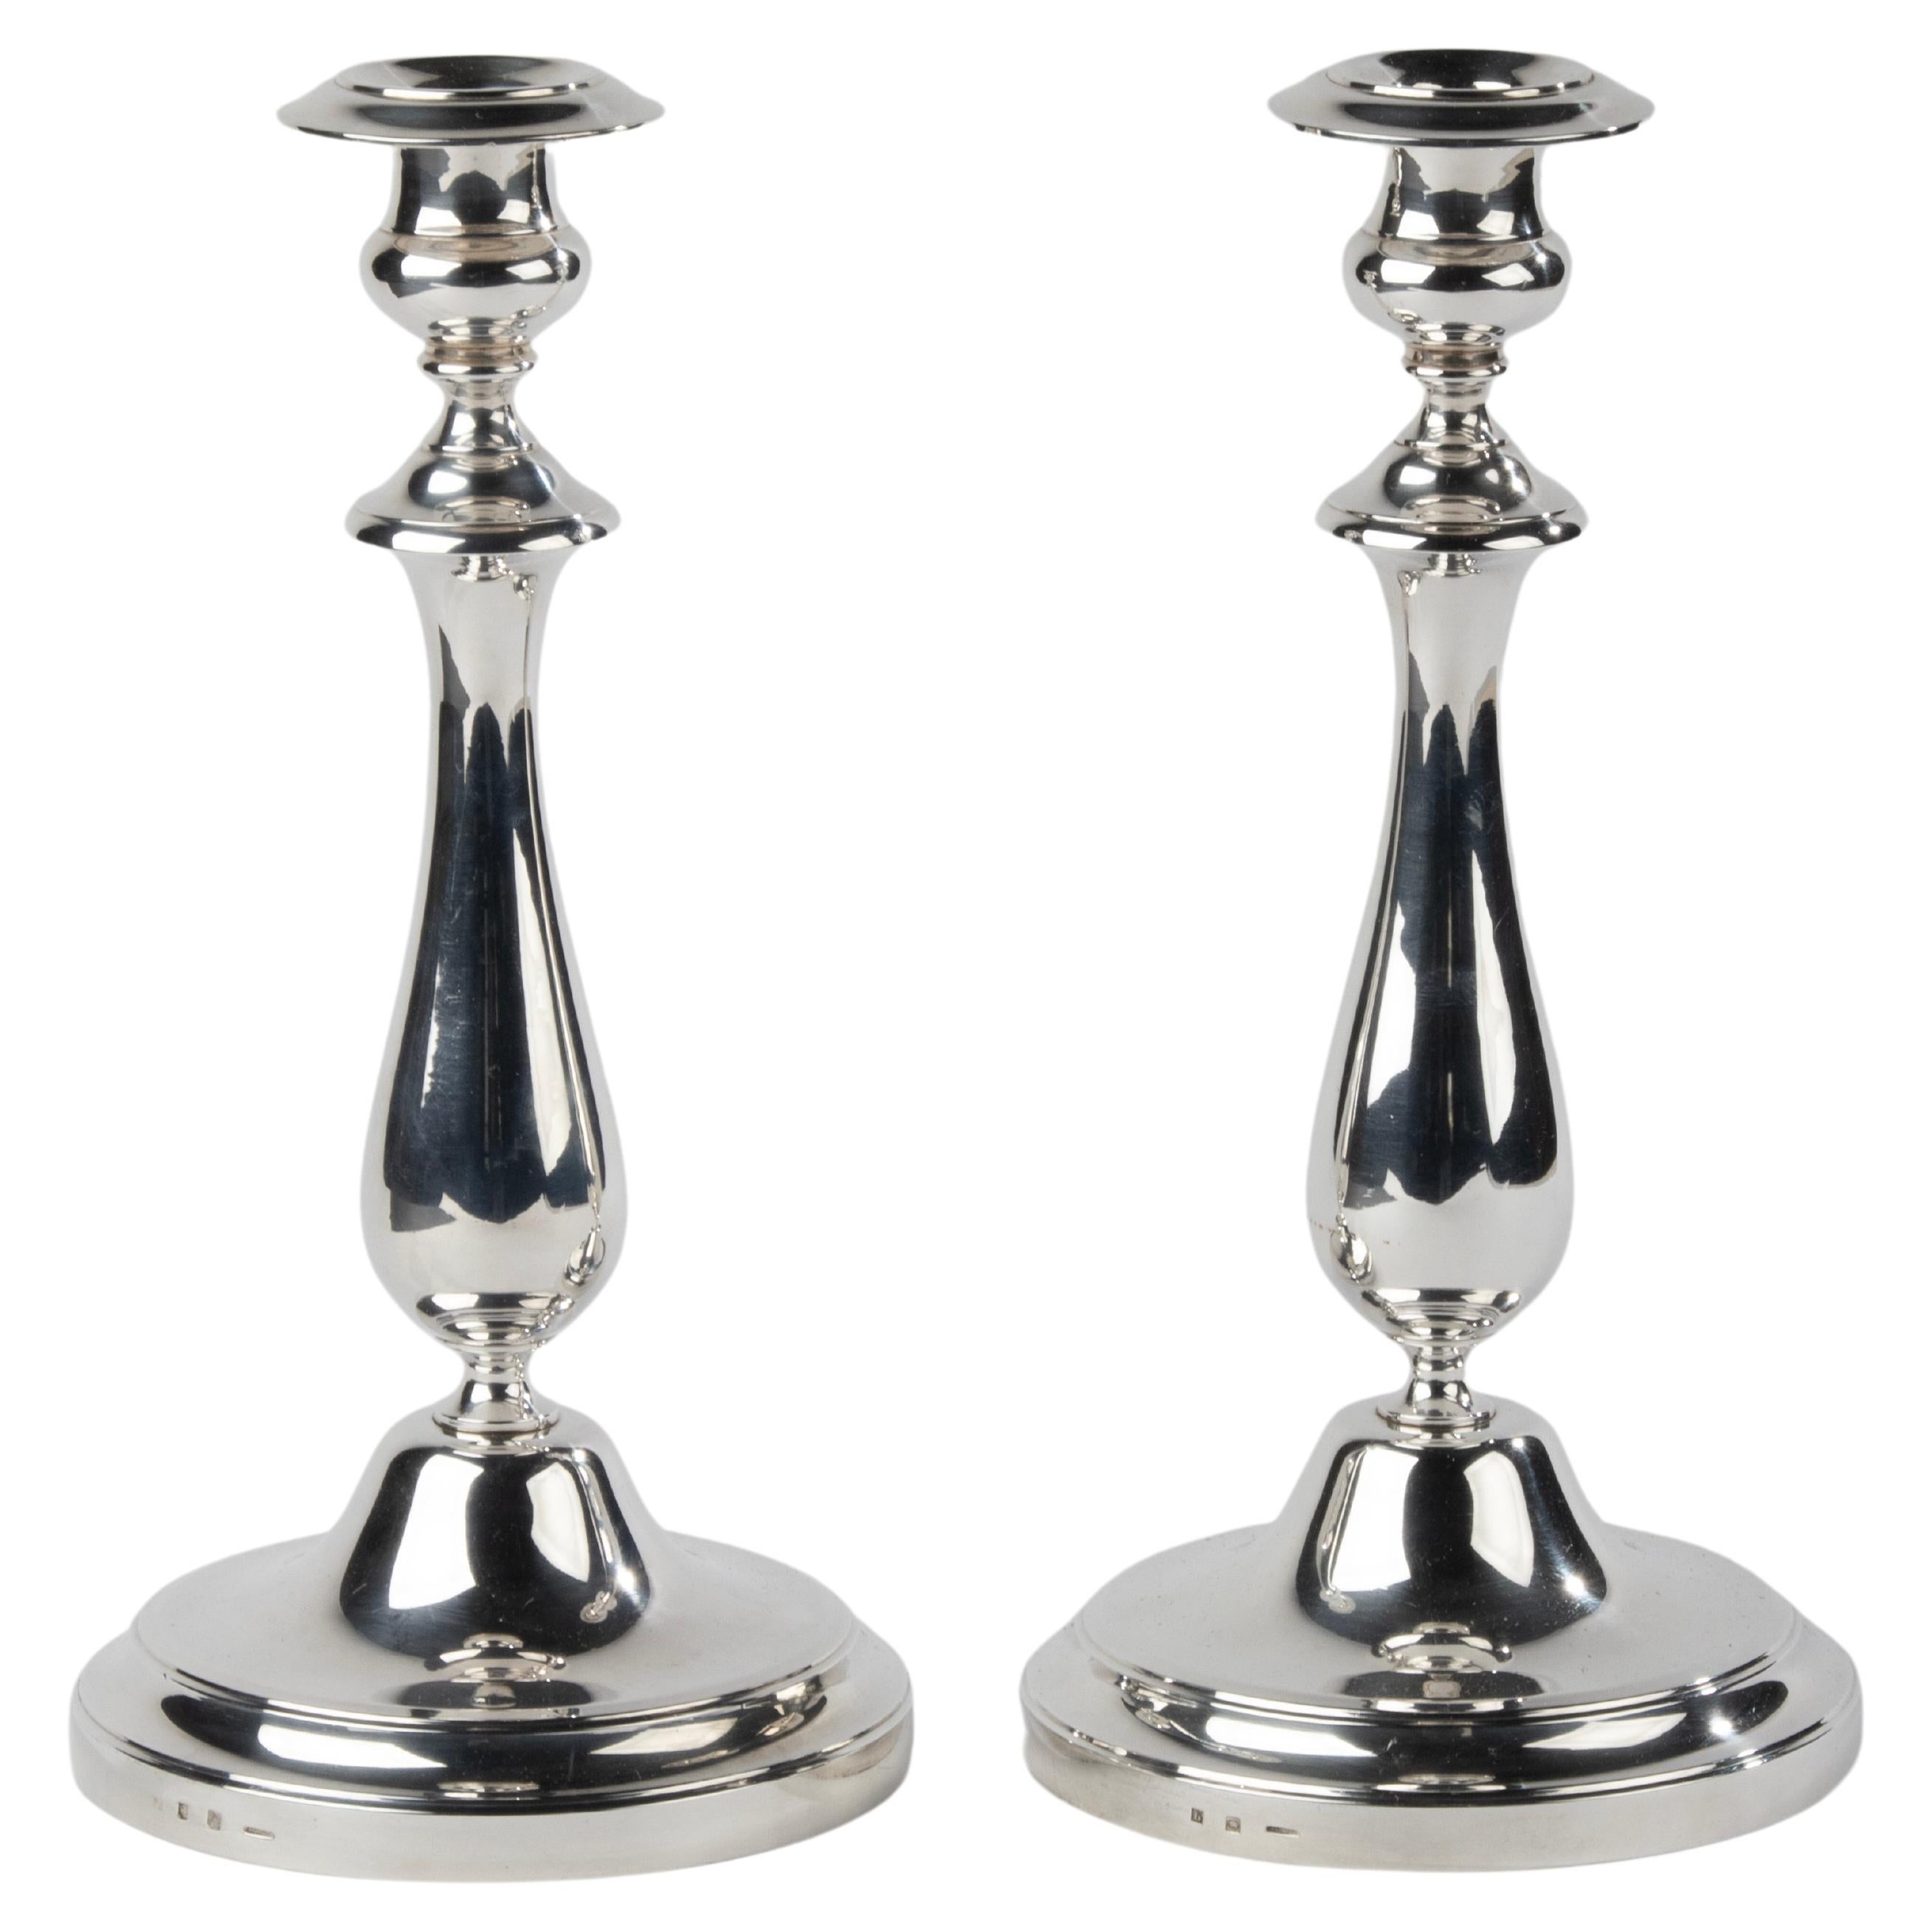 A Pair of Modern Classic Silver Plated Candlesticks made by Christofle France